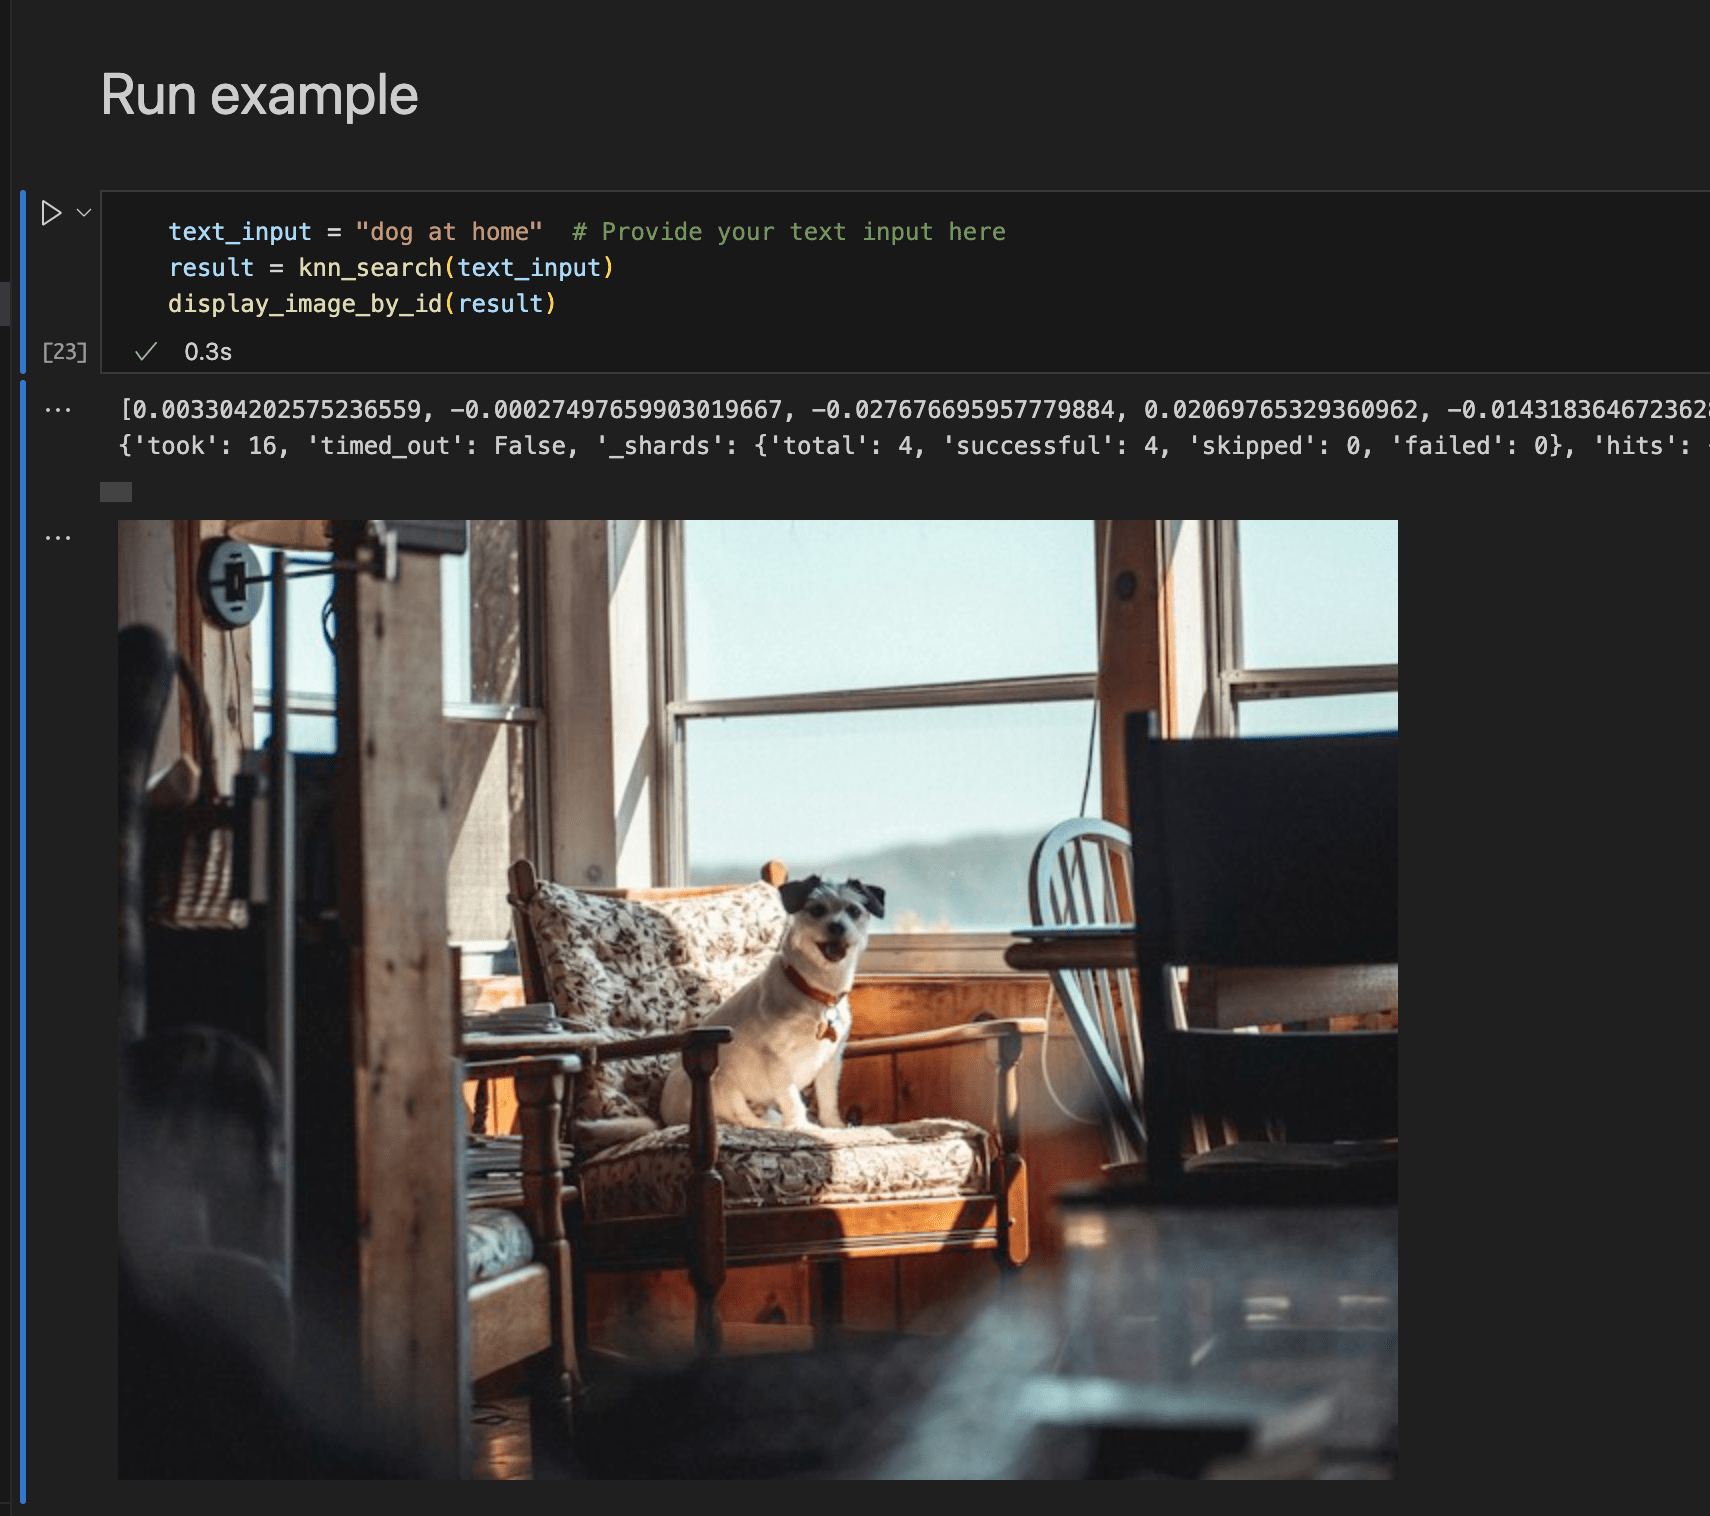 Running an example with a phrase dog at home